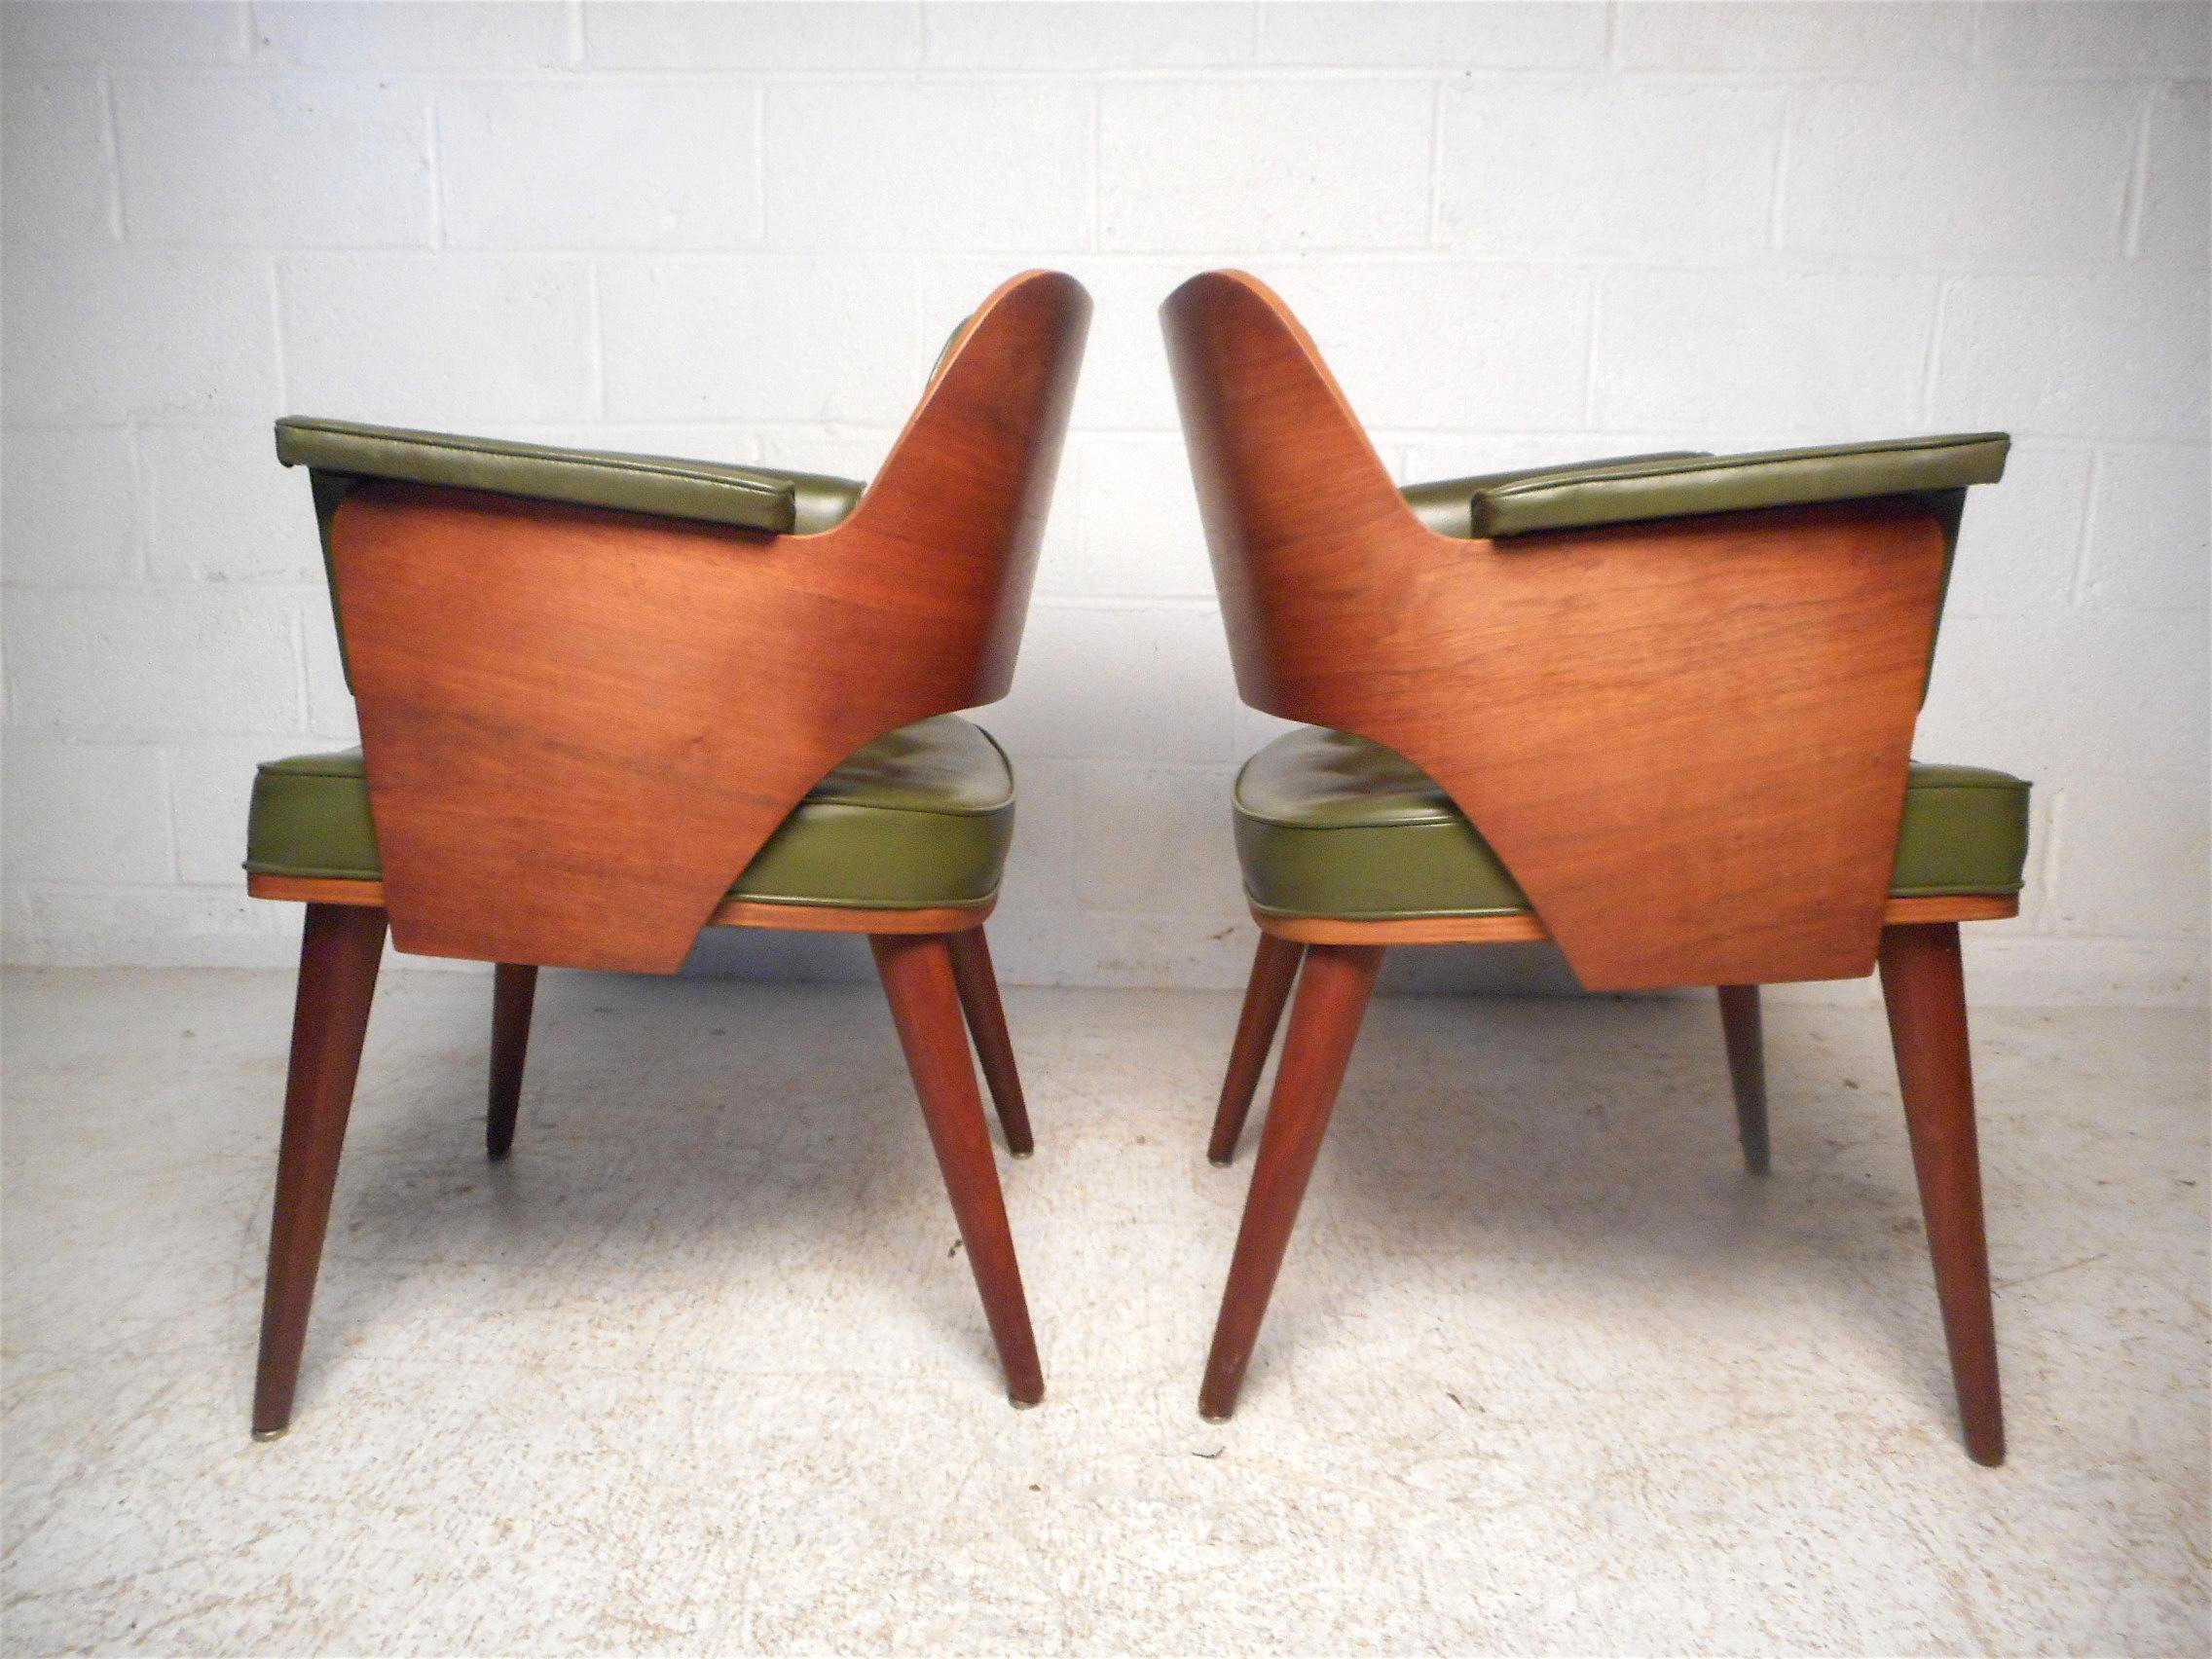 Stylish and unusual pair of midcentury chairs by Taylor Chair Co. Sculpted wooden backrests along with splayed and tapered legs give these chairs a striking visual profile. Covered in a vintage green tufted faux-leather upholstery. Great pair of